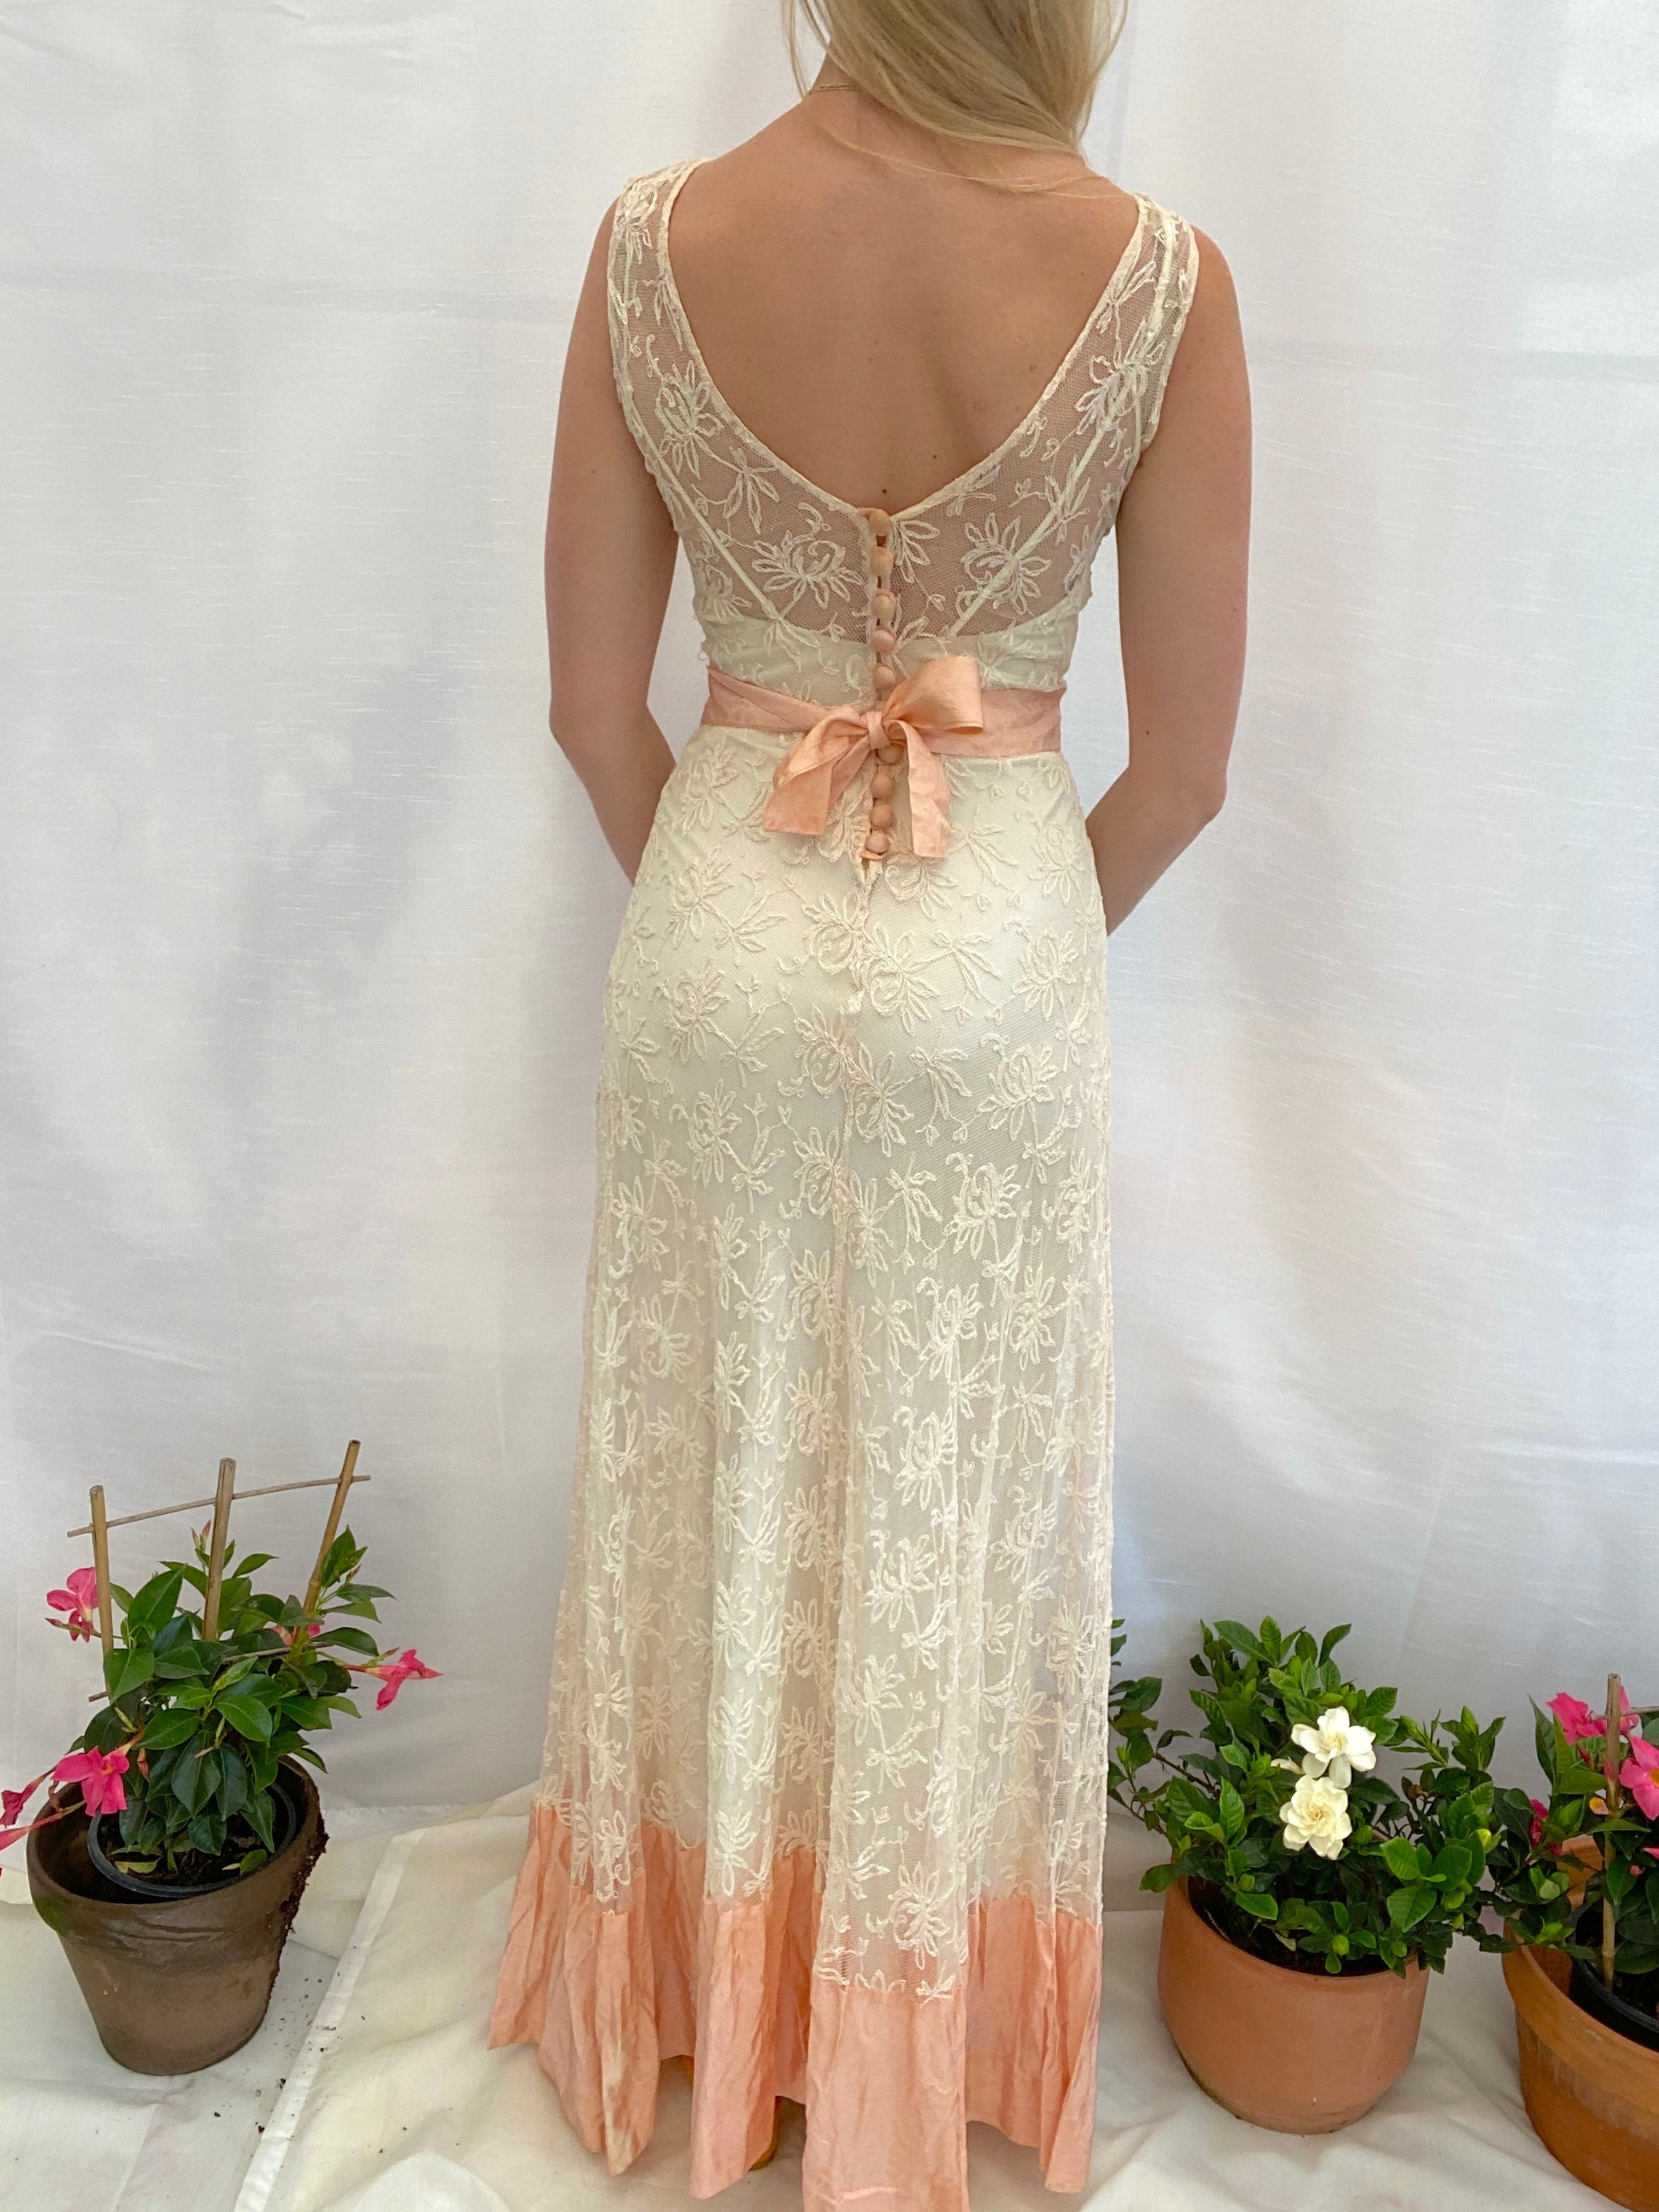 1930's Pale Peach Cotton Embroidered Net Dress